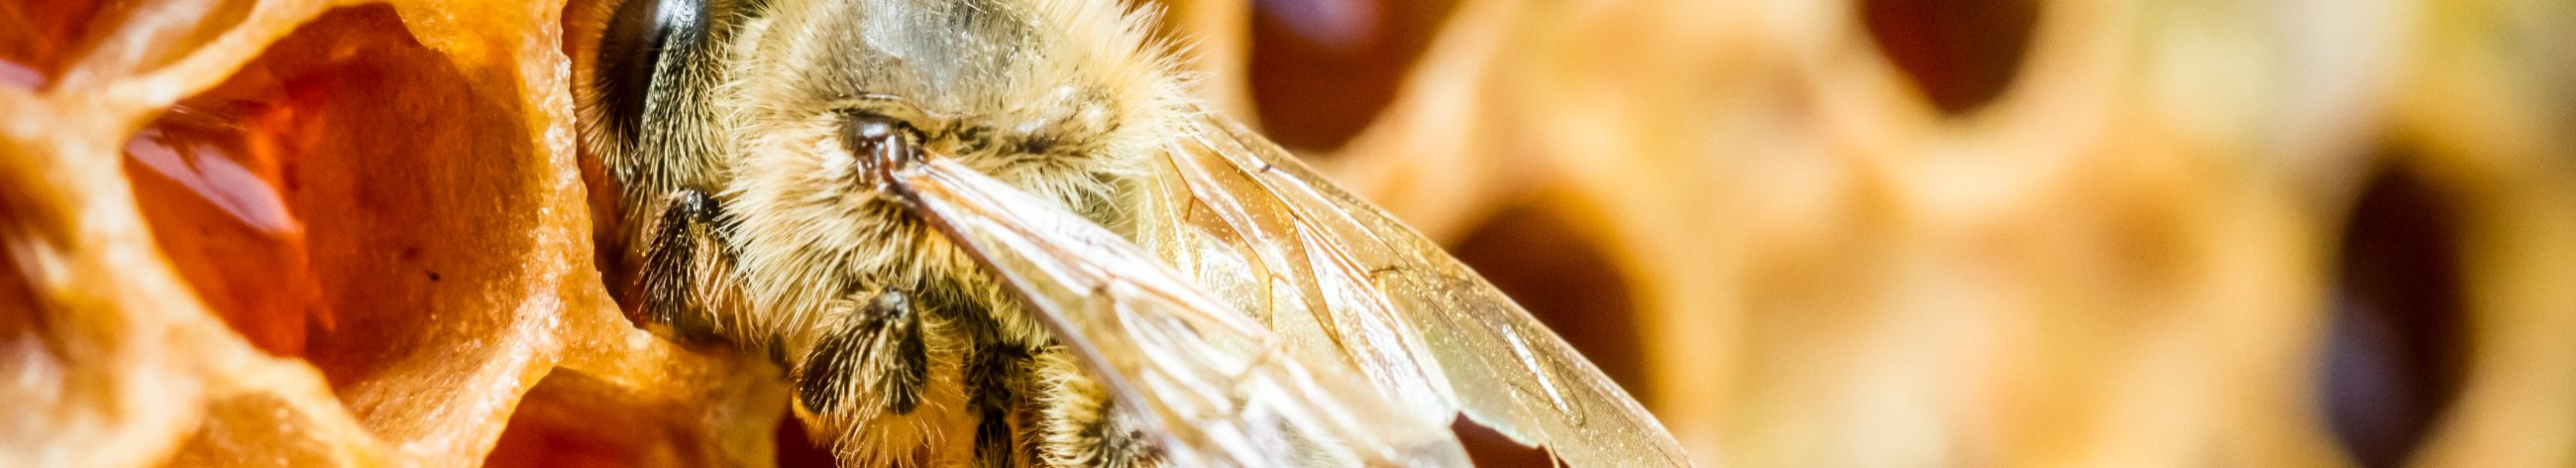 We provide comprehensive audit and accounting services tailored for small to medium-sized enterprises, alongside producing and distributing premium beekeeping products.